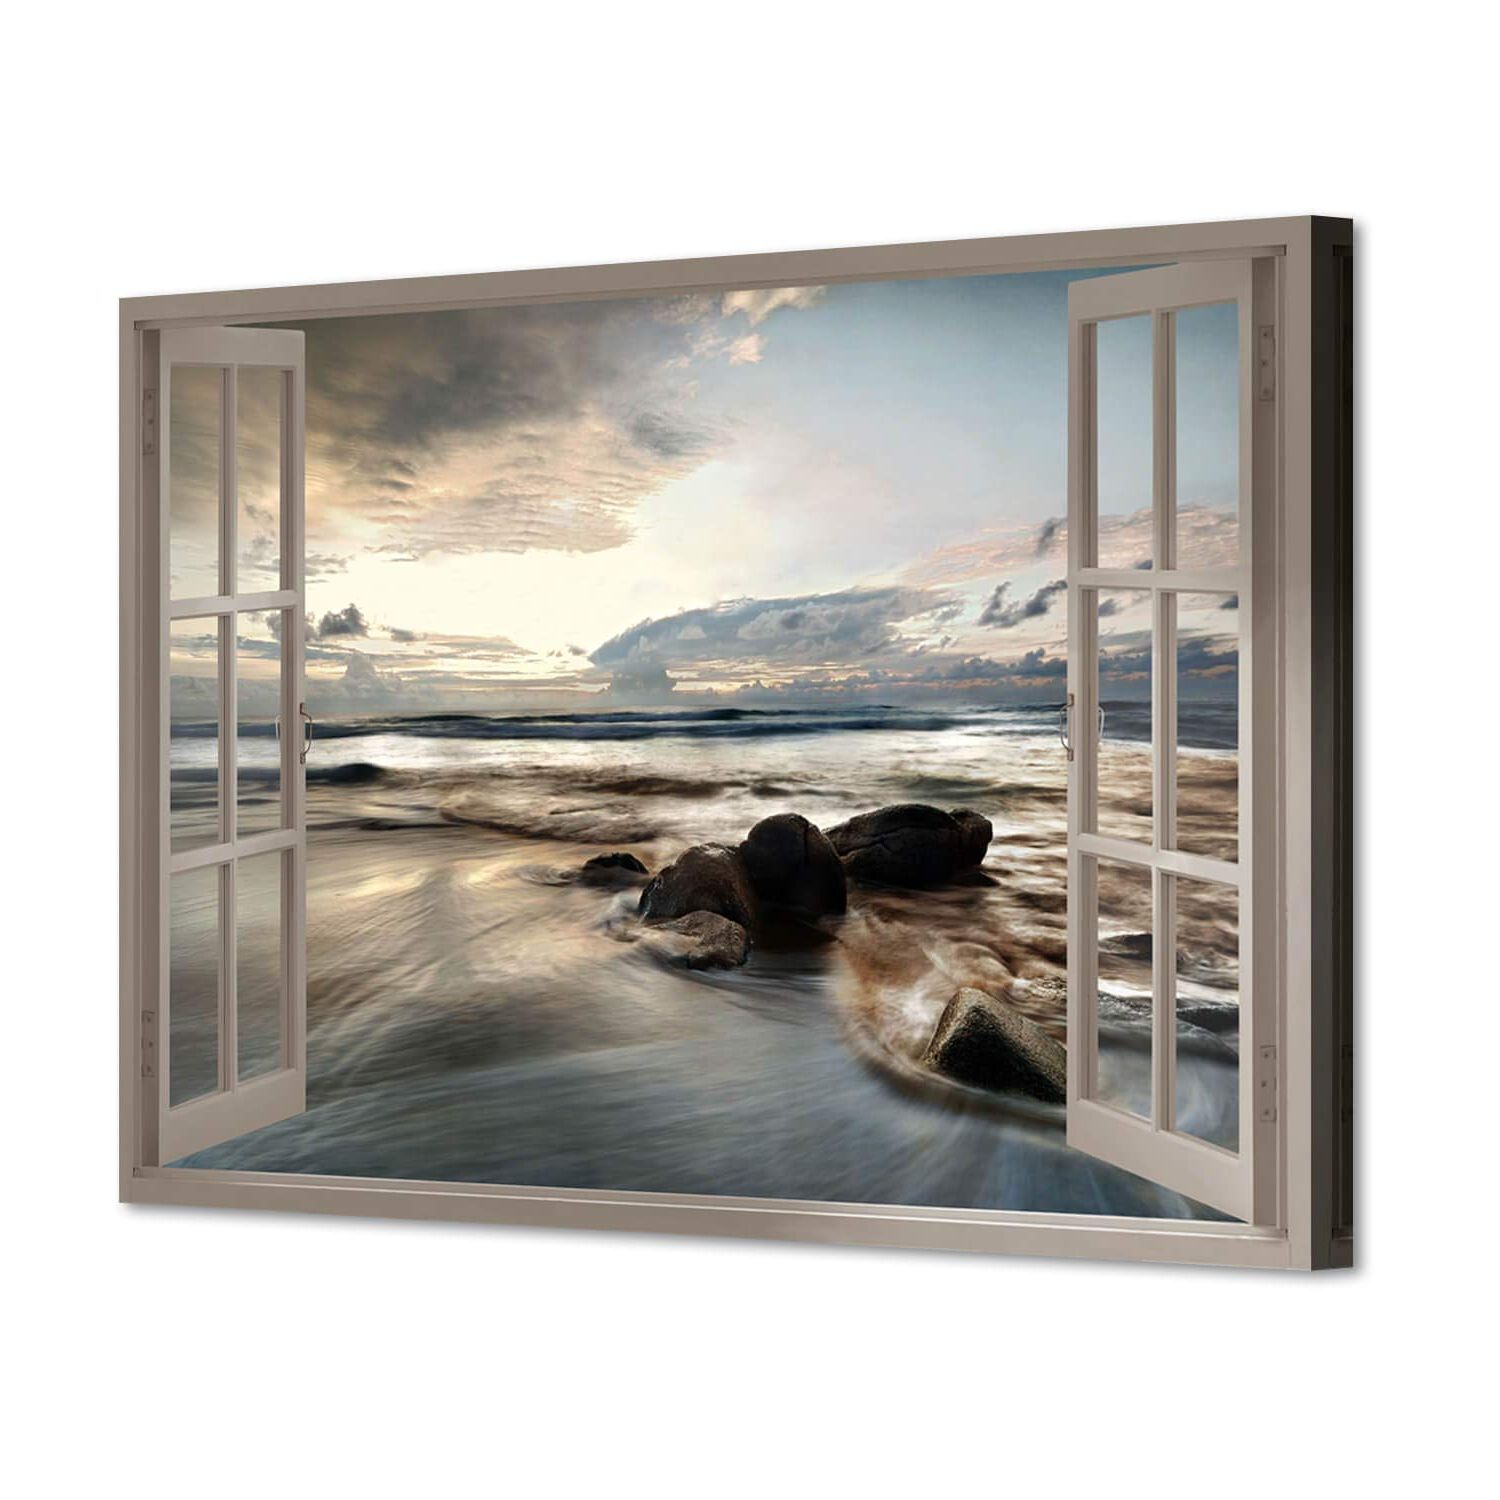 Amazon: Artistic Path Fake Window Canvas Wall Art: Open Window View  Rocky Beach With Distant Sunset Prints Artwork For Office (36''w X  24''h,multi Sized): Posters & Prints Regarding Well Known The Open Window Wall Art (View 9 of 15)